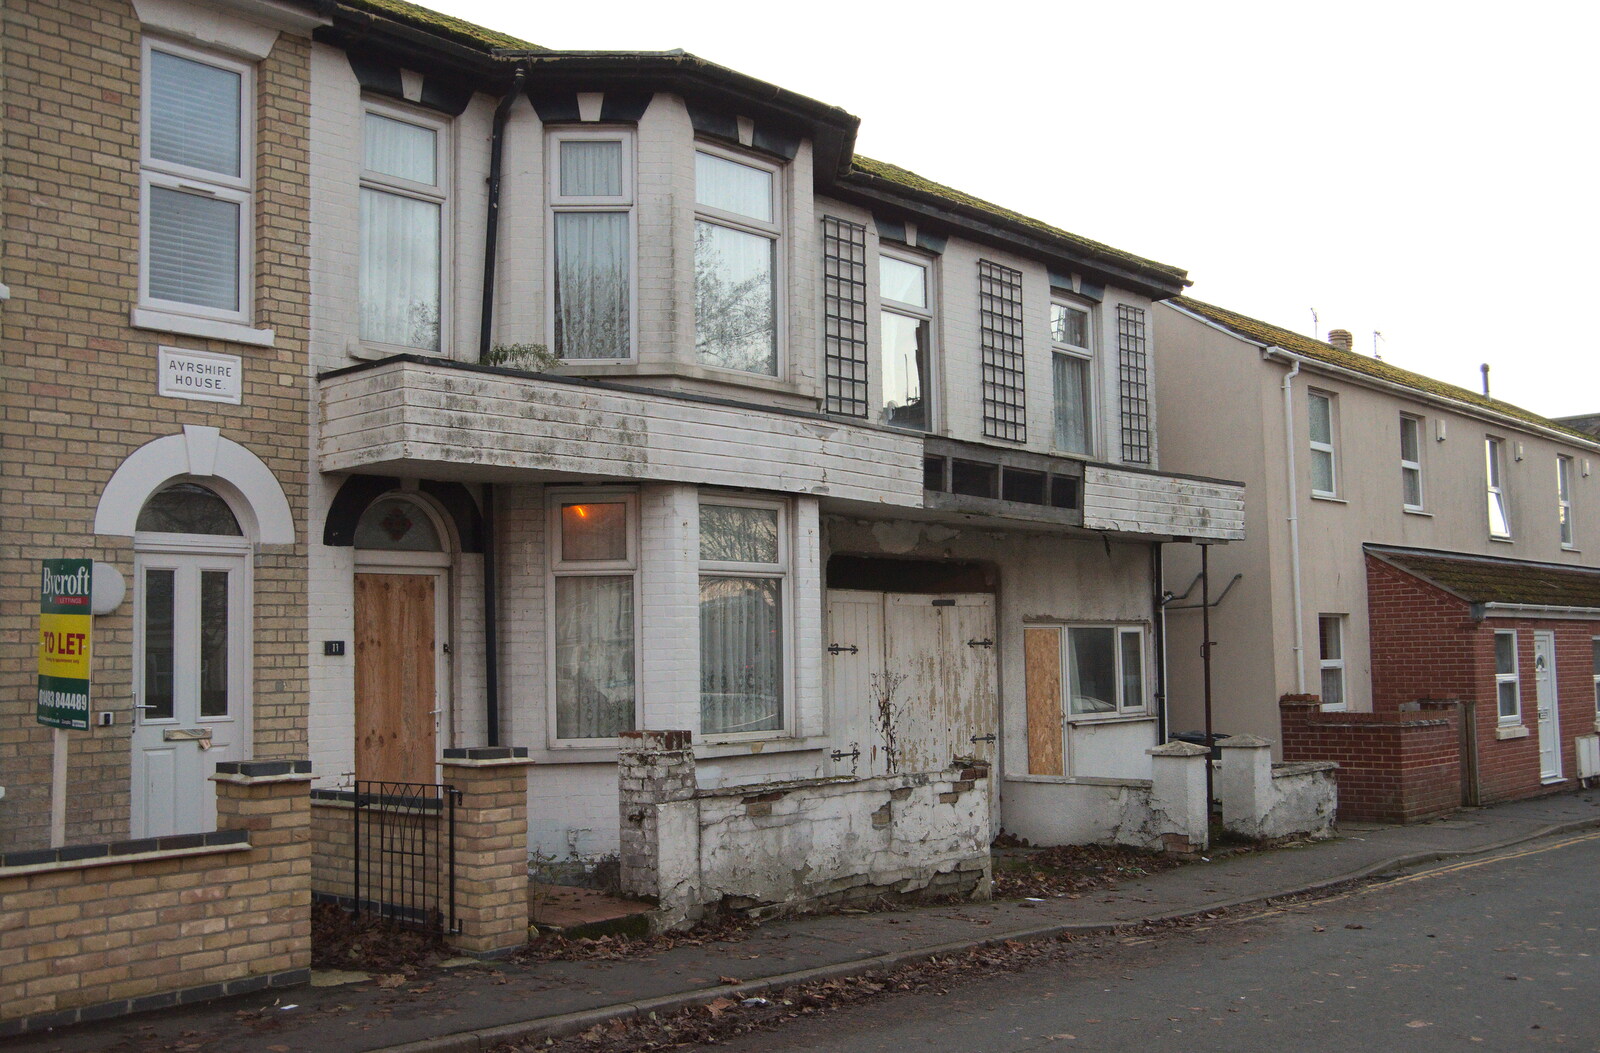 A very derelict terraced house from The Hippodrome Christmas Spectacular, Great Yarmouth, Norfolk - 29th December 2022